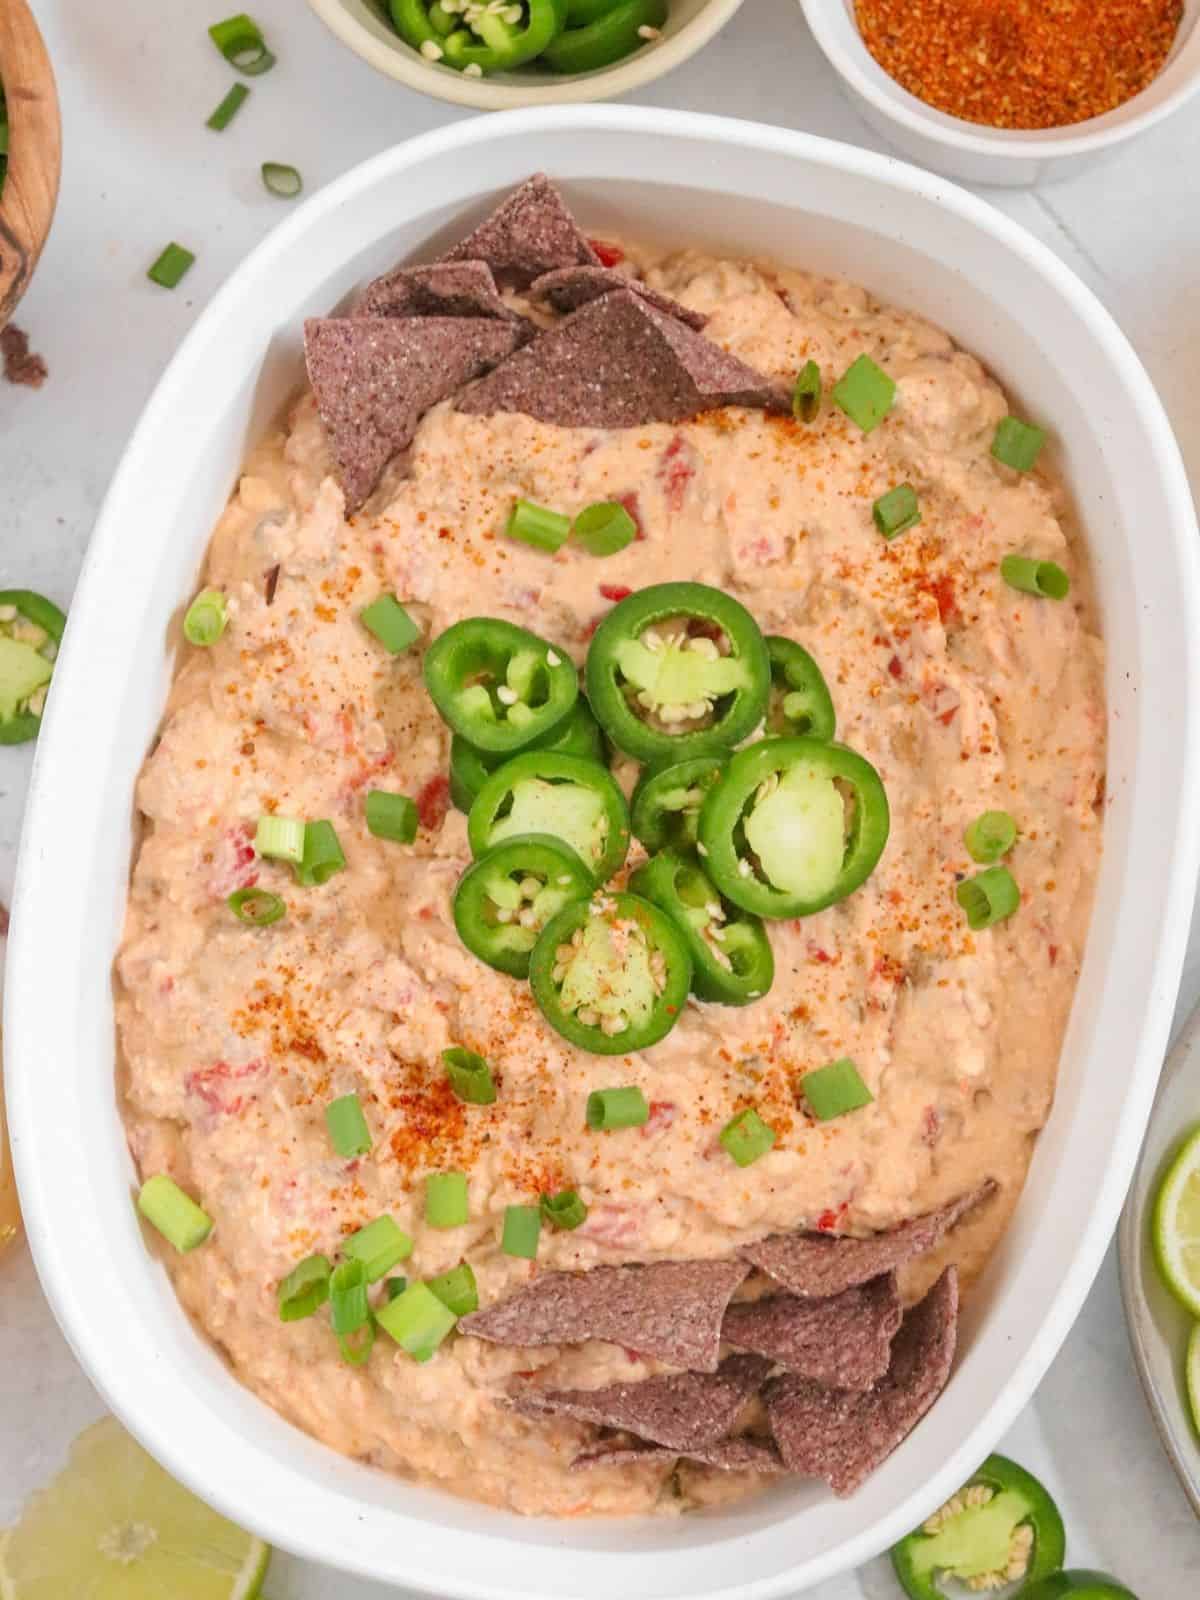 Bowl filled with creamy recipe topped with jalapenos and tortilla chips